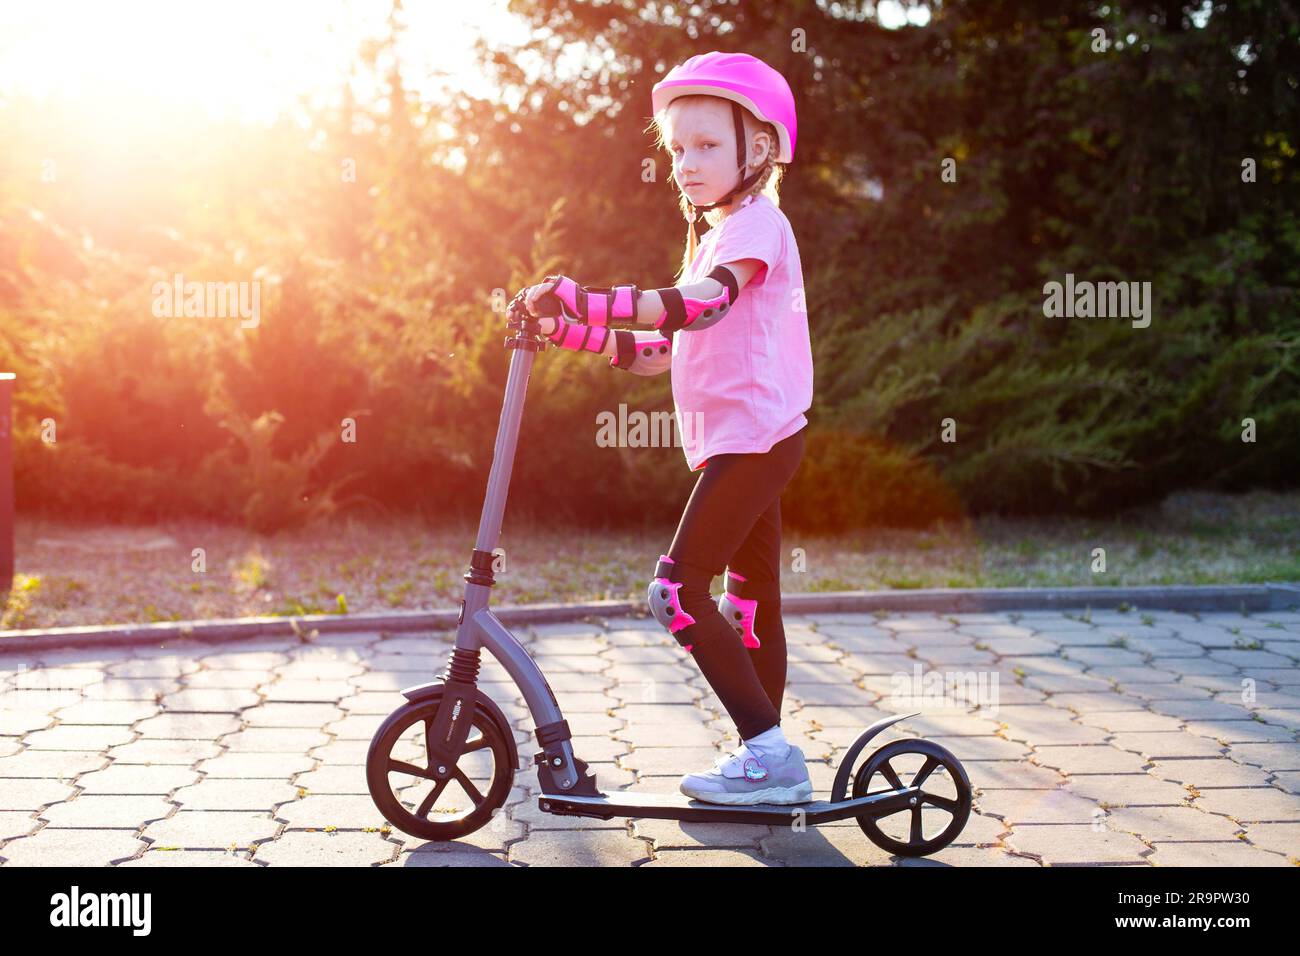 A beautiful girl in a pink protective outfit rides a scooter through the streets of the city in summer. Safe cycling and scootering without injury, mo Stock Photo